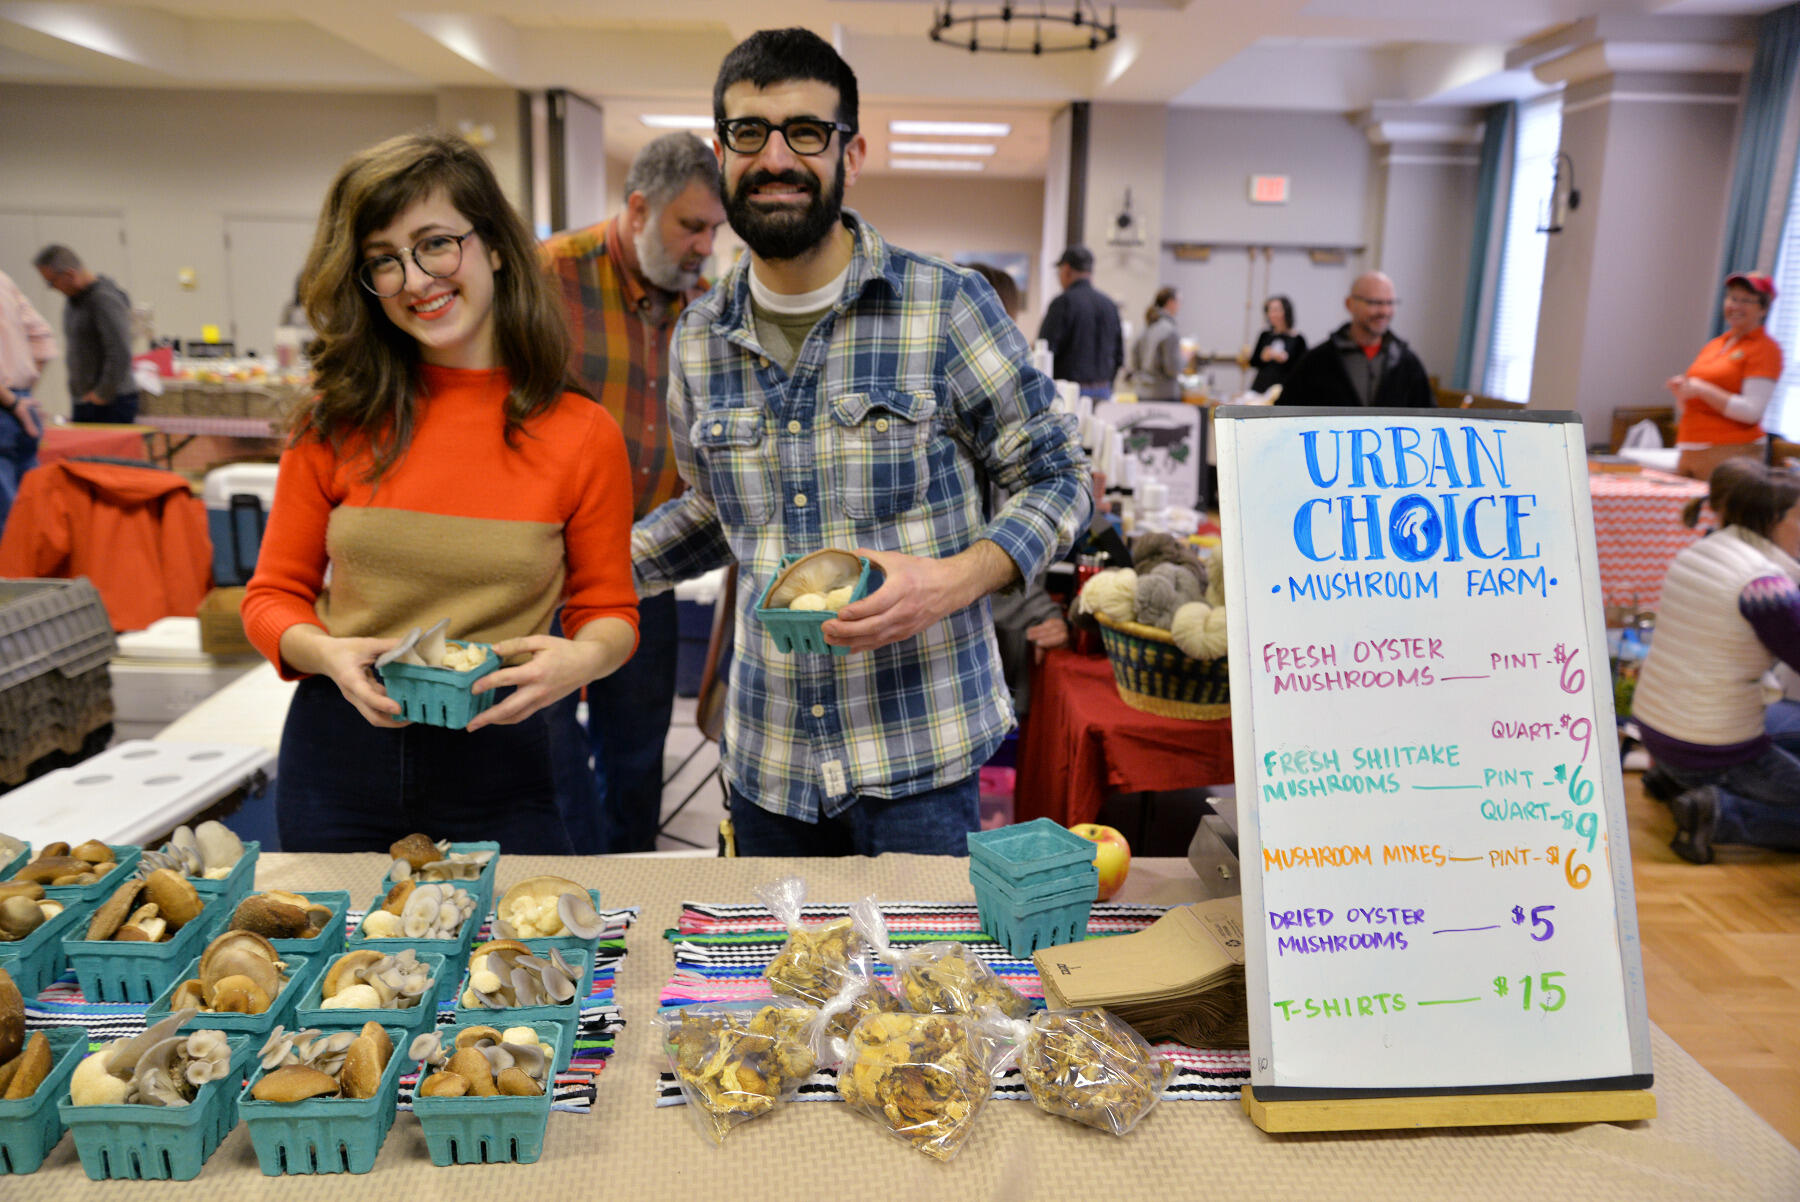 Lindsay Hawk, who graduated from the School of the Arts in May, and Jake Greenbaum, who graduated in 2015 from the School of Business, sell mushrooms for Urban Choice Mushroom Farm at a local farmers market.
<br>Photo by Brian McNeill, University Public Affairs.